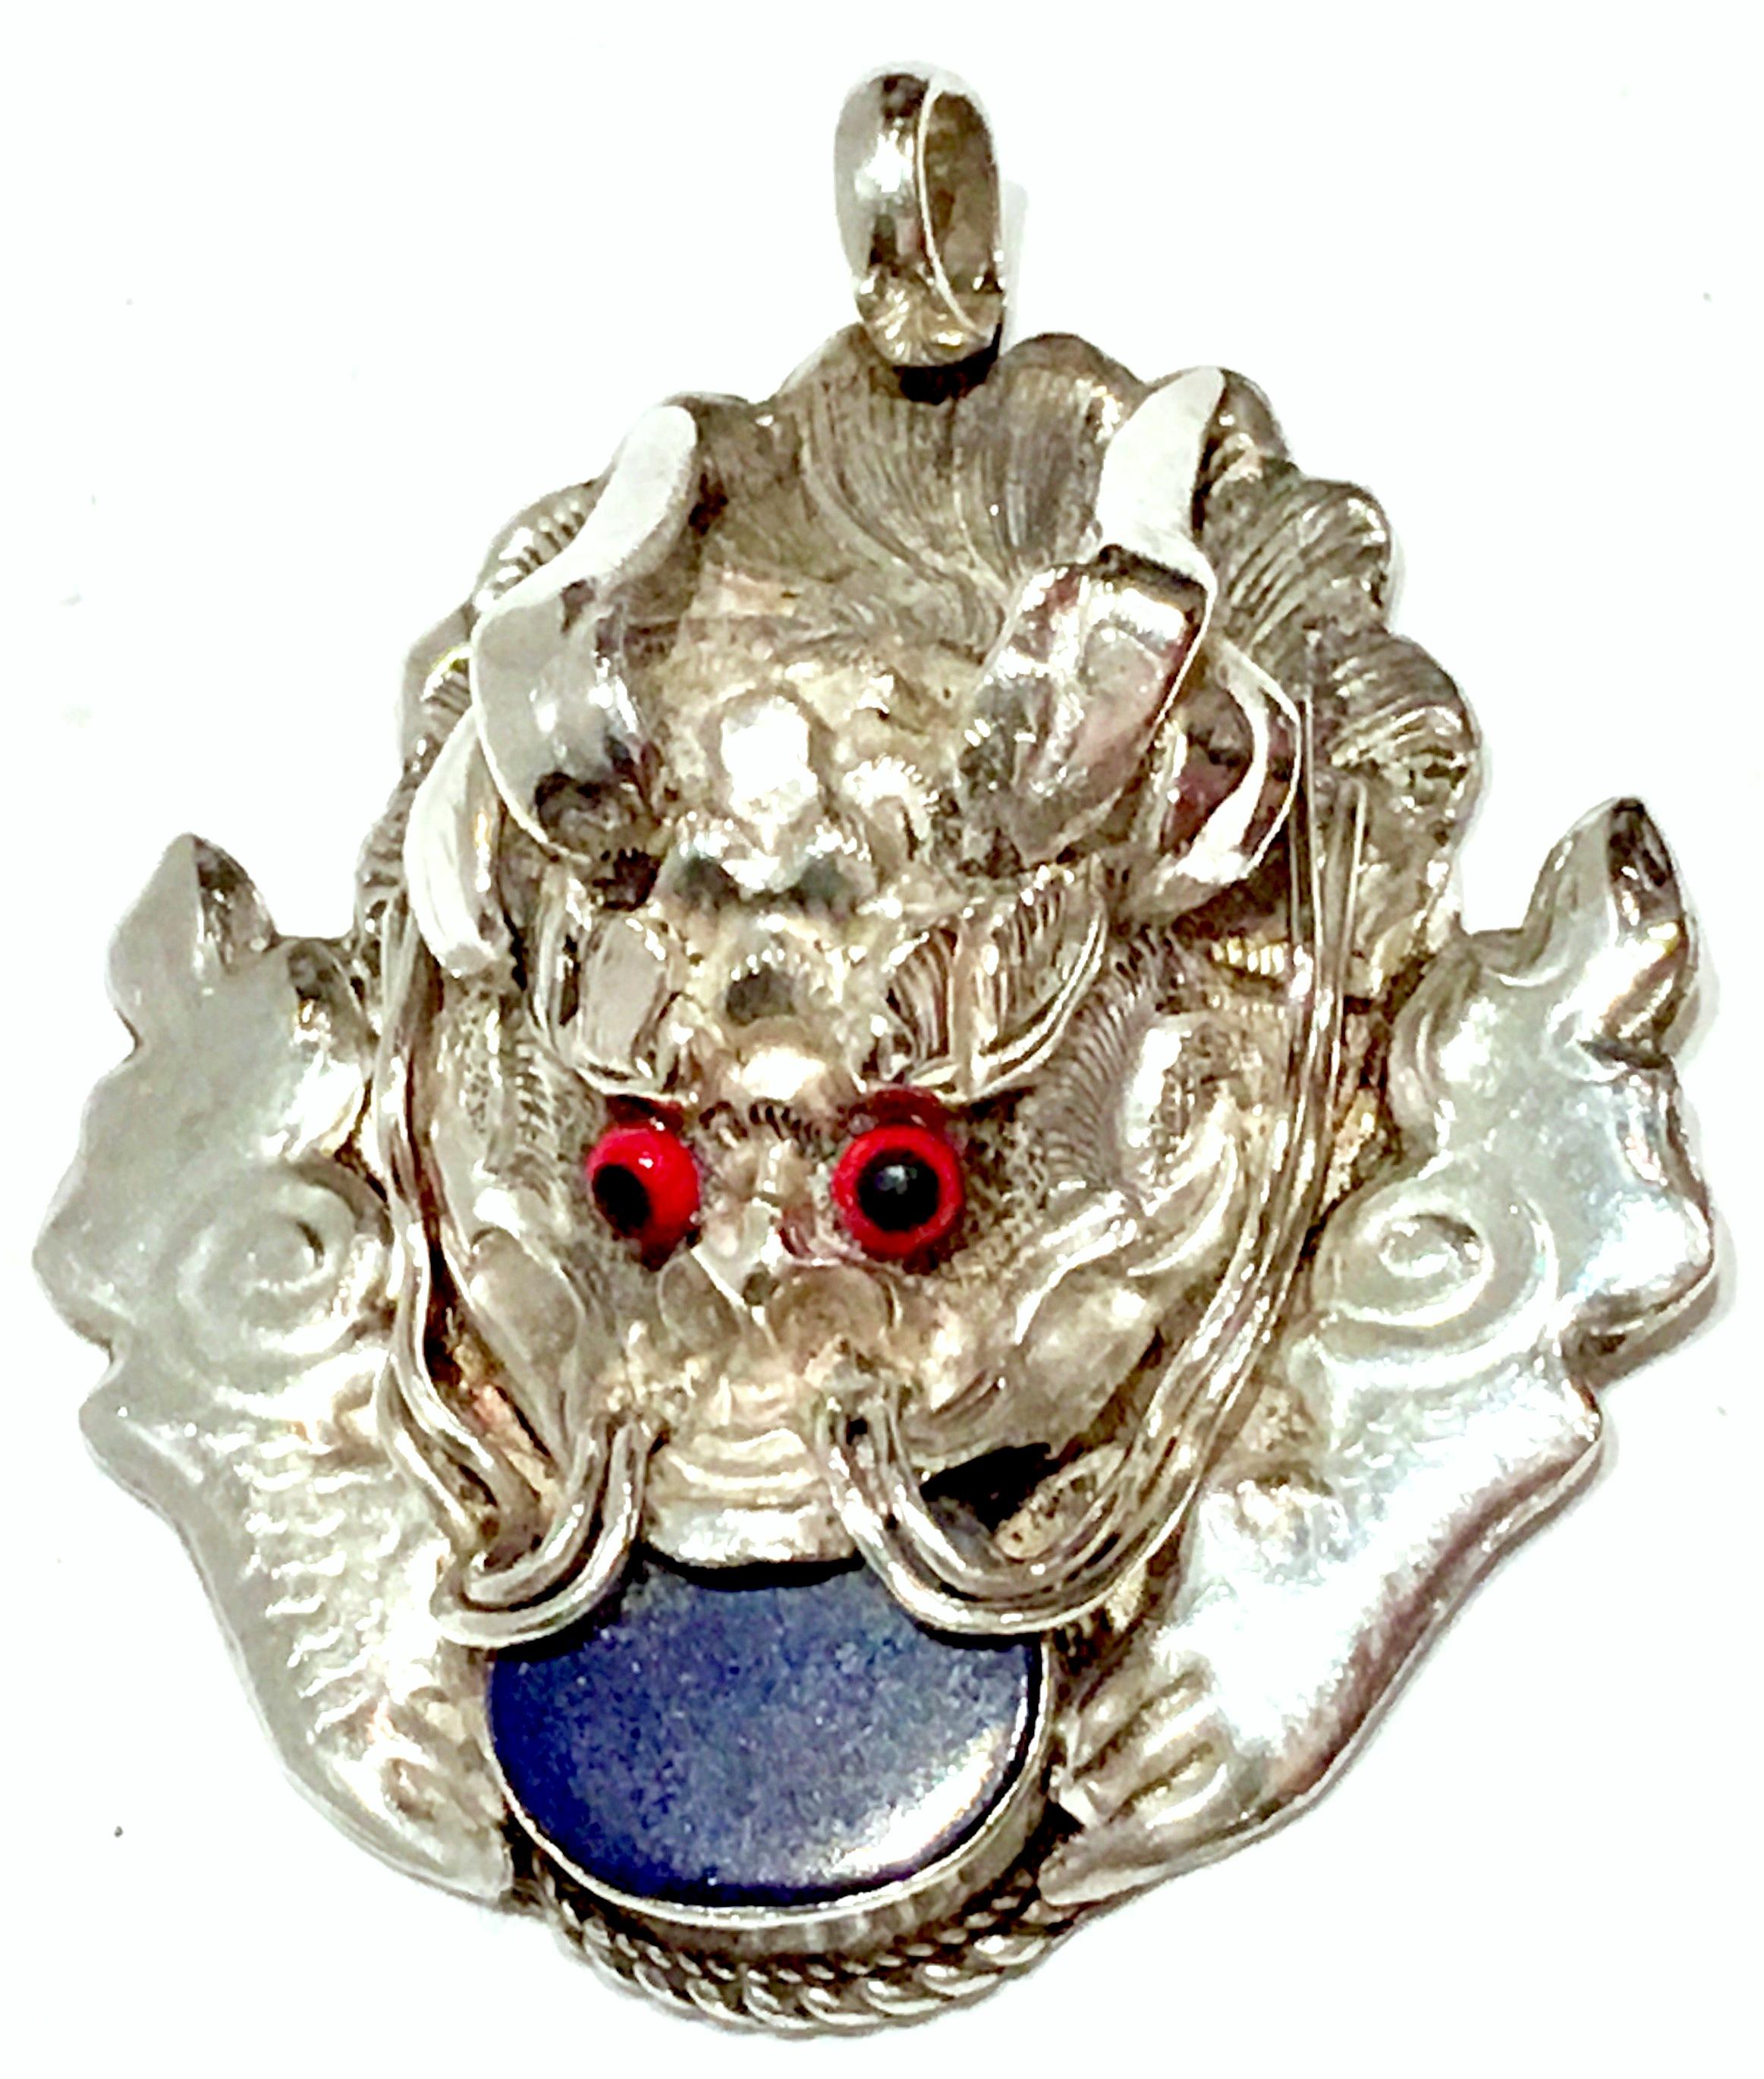 Rare sterling silver 925 dragon head with a polished Lapis Lazuli bezel set stone. Red eyes are made of resin. Signed on the backside, 925. Weight, 8 grams. Lapis stone measures approximately, .5